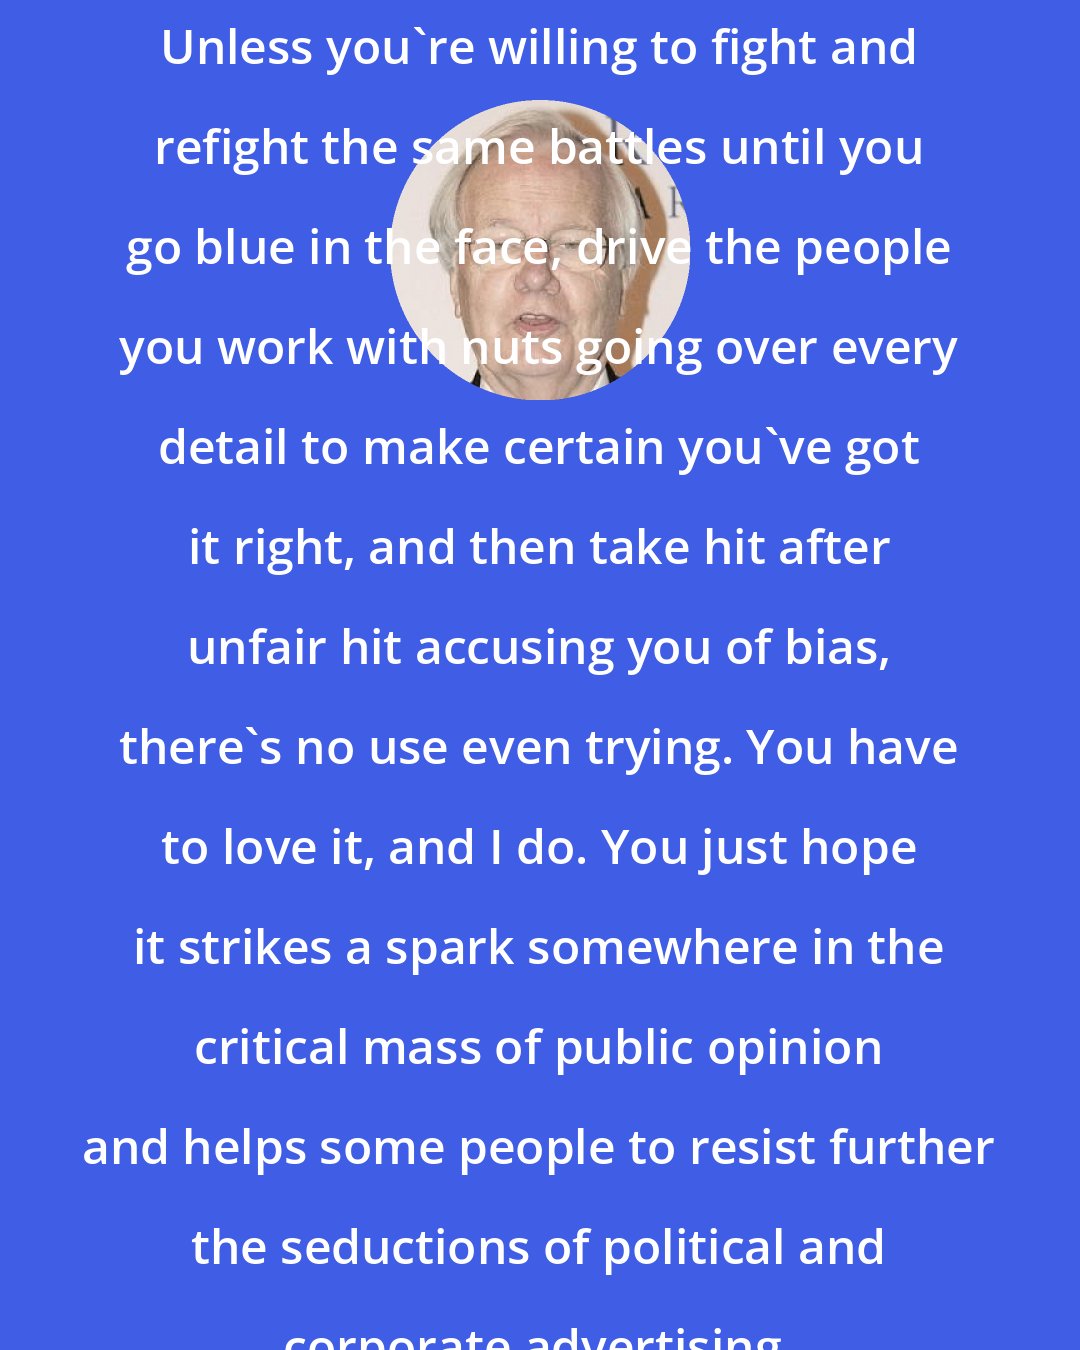 Bill Moyers: Unless you're willing to fight and refight the same battles until you go blue in the face, drive the people you work with nuts going over every detail to make certain you've got it right, and then take hit after unfair hit accusing you of bias, there's no use even trying. You have to love it, and I do. You just hope it strikes a spark somewhere in the critical mass of public opinion and helps some people to resist further the seductions of political and corporate advertising.